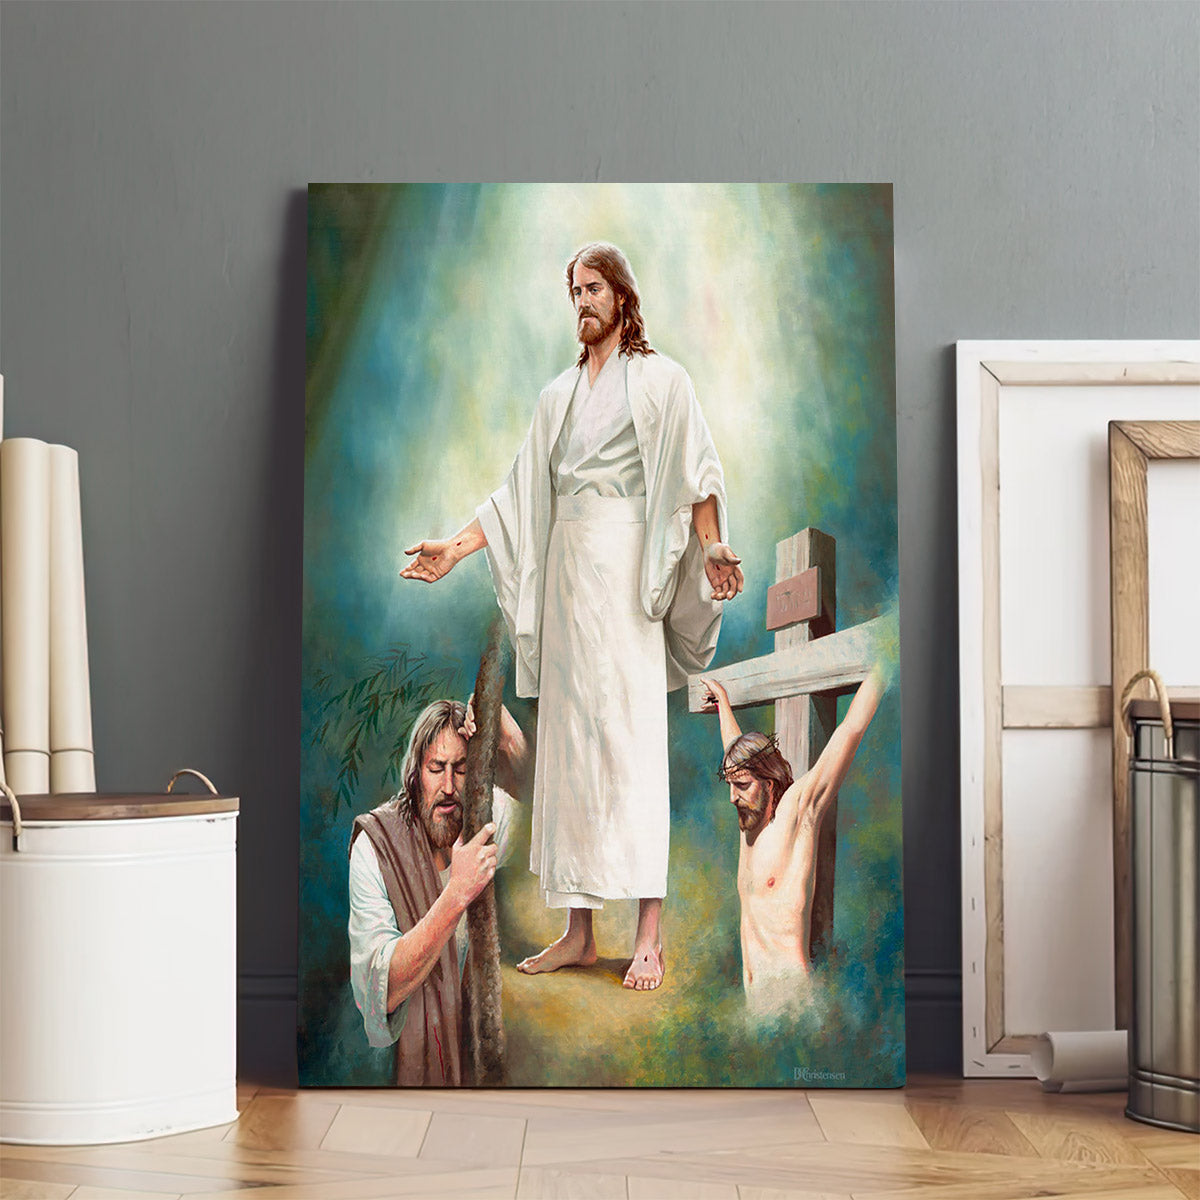 The Atonement Canvas Wall Art - Jesus Canvas Pictures - Christian Canvas Wall Art